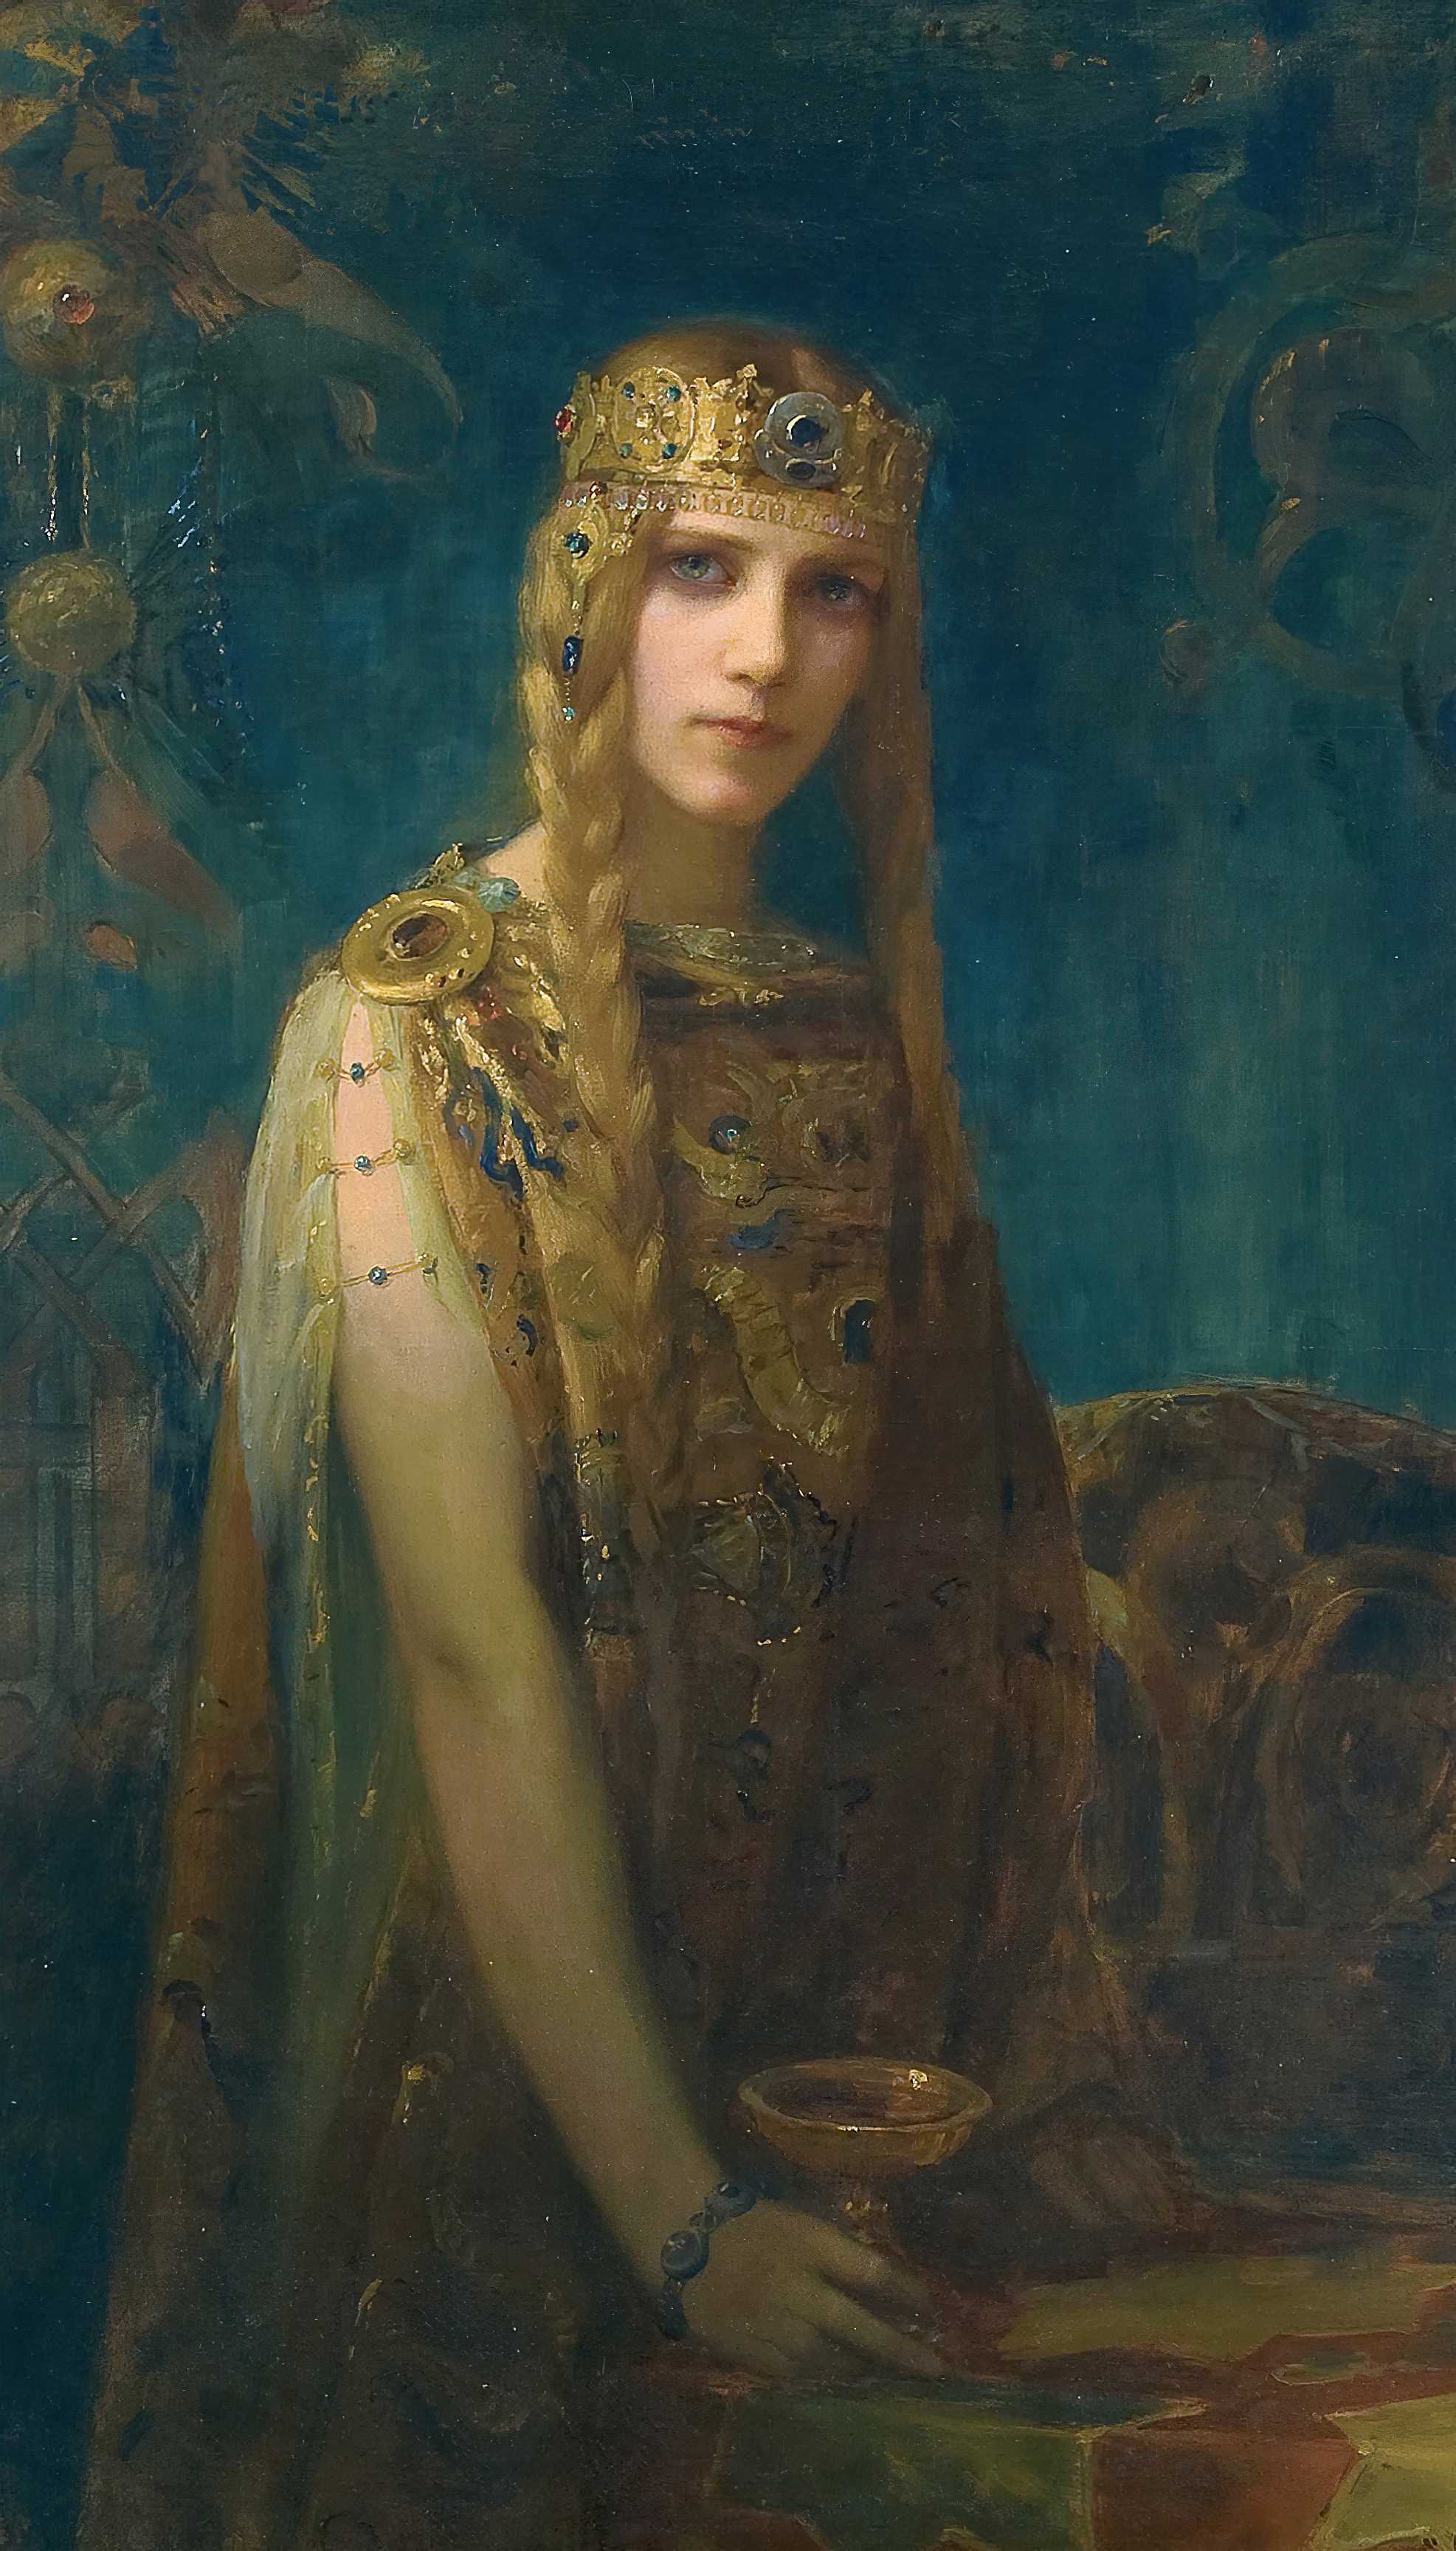 Find out more about Gaston Bussière - Isolde, The Celt Princess